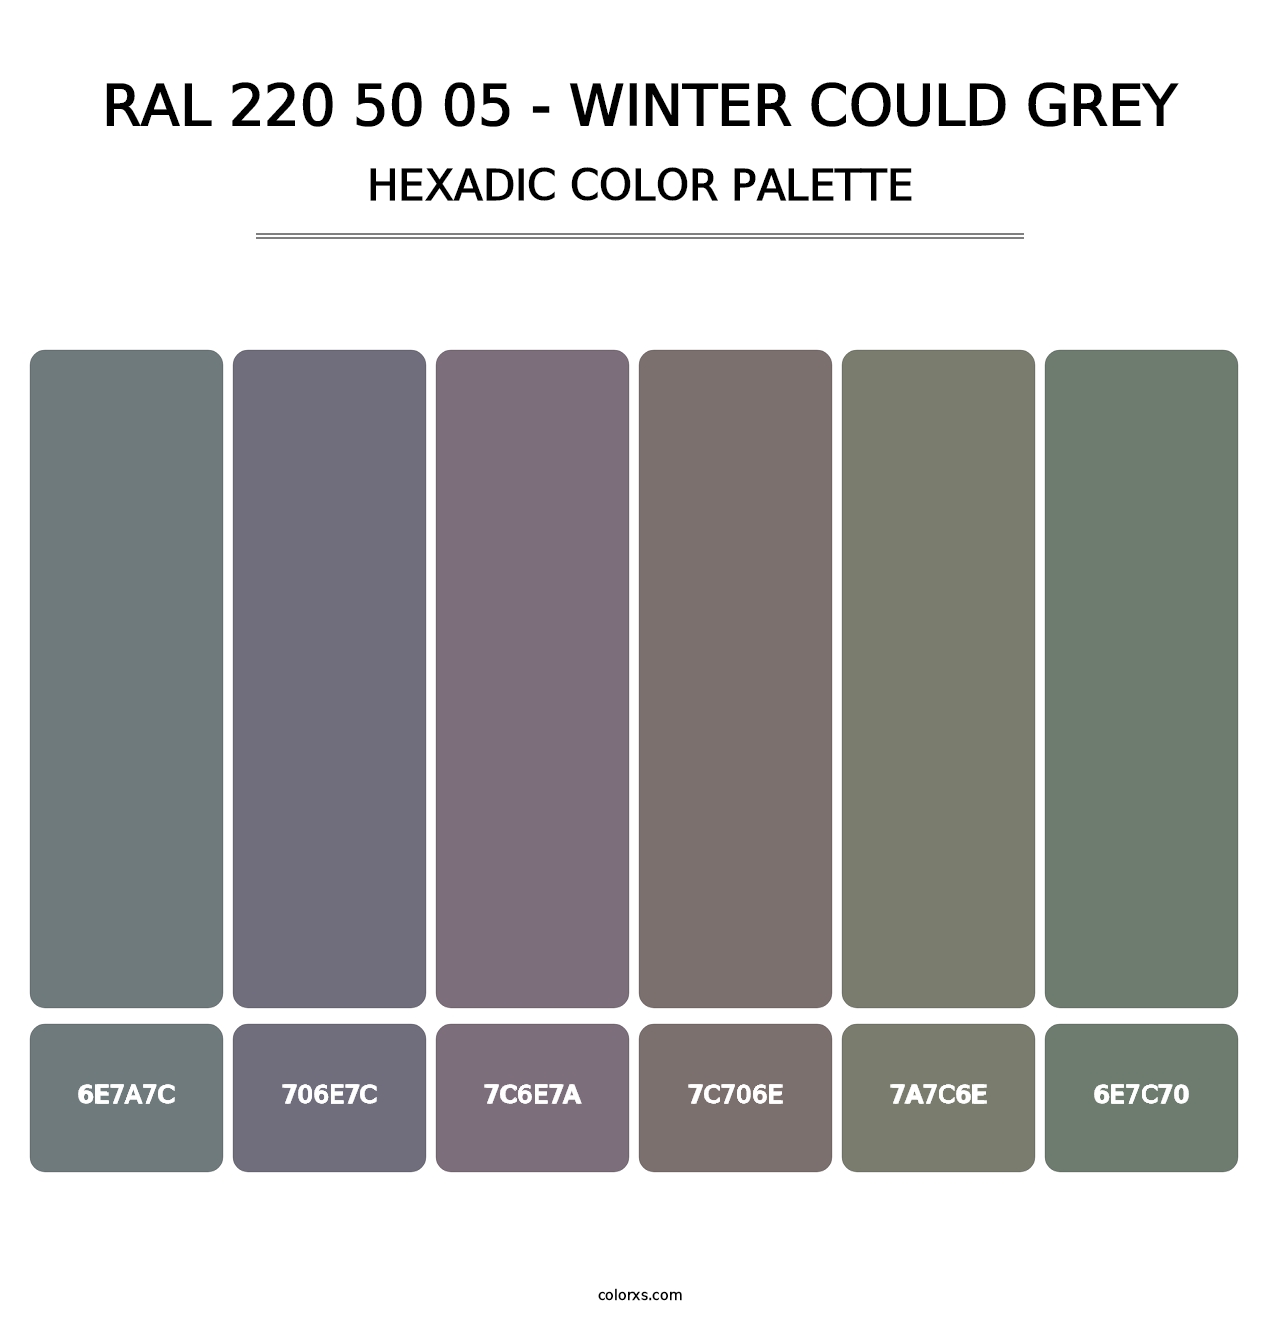 RAL 220 50 05 - Winter Could Grey - Hexadic Color Palette